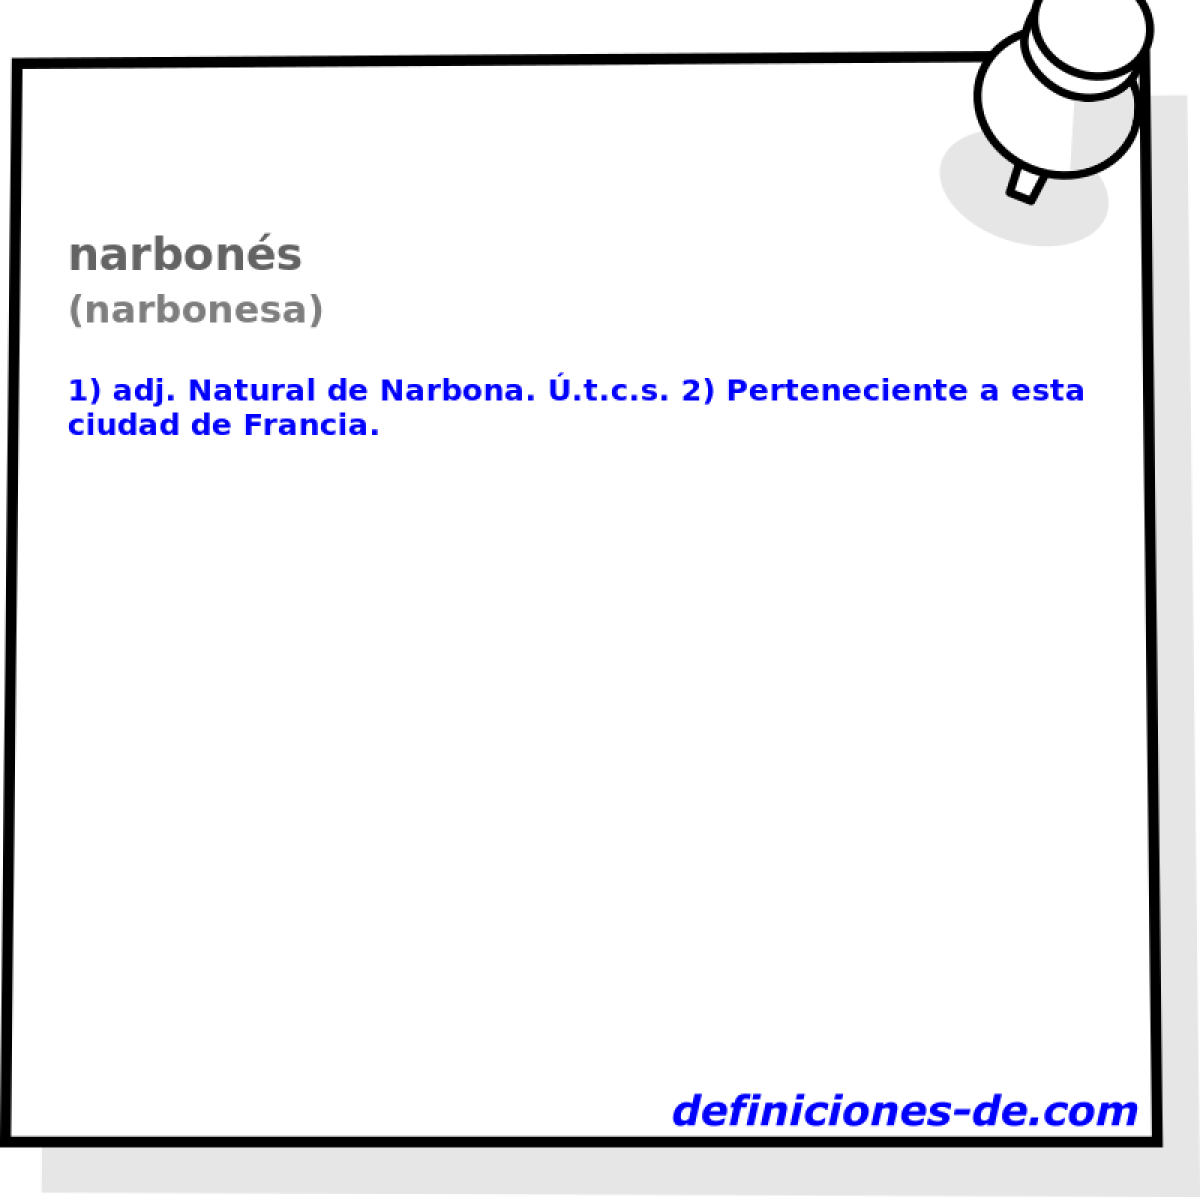 narbons (narbonesa)